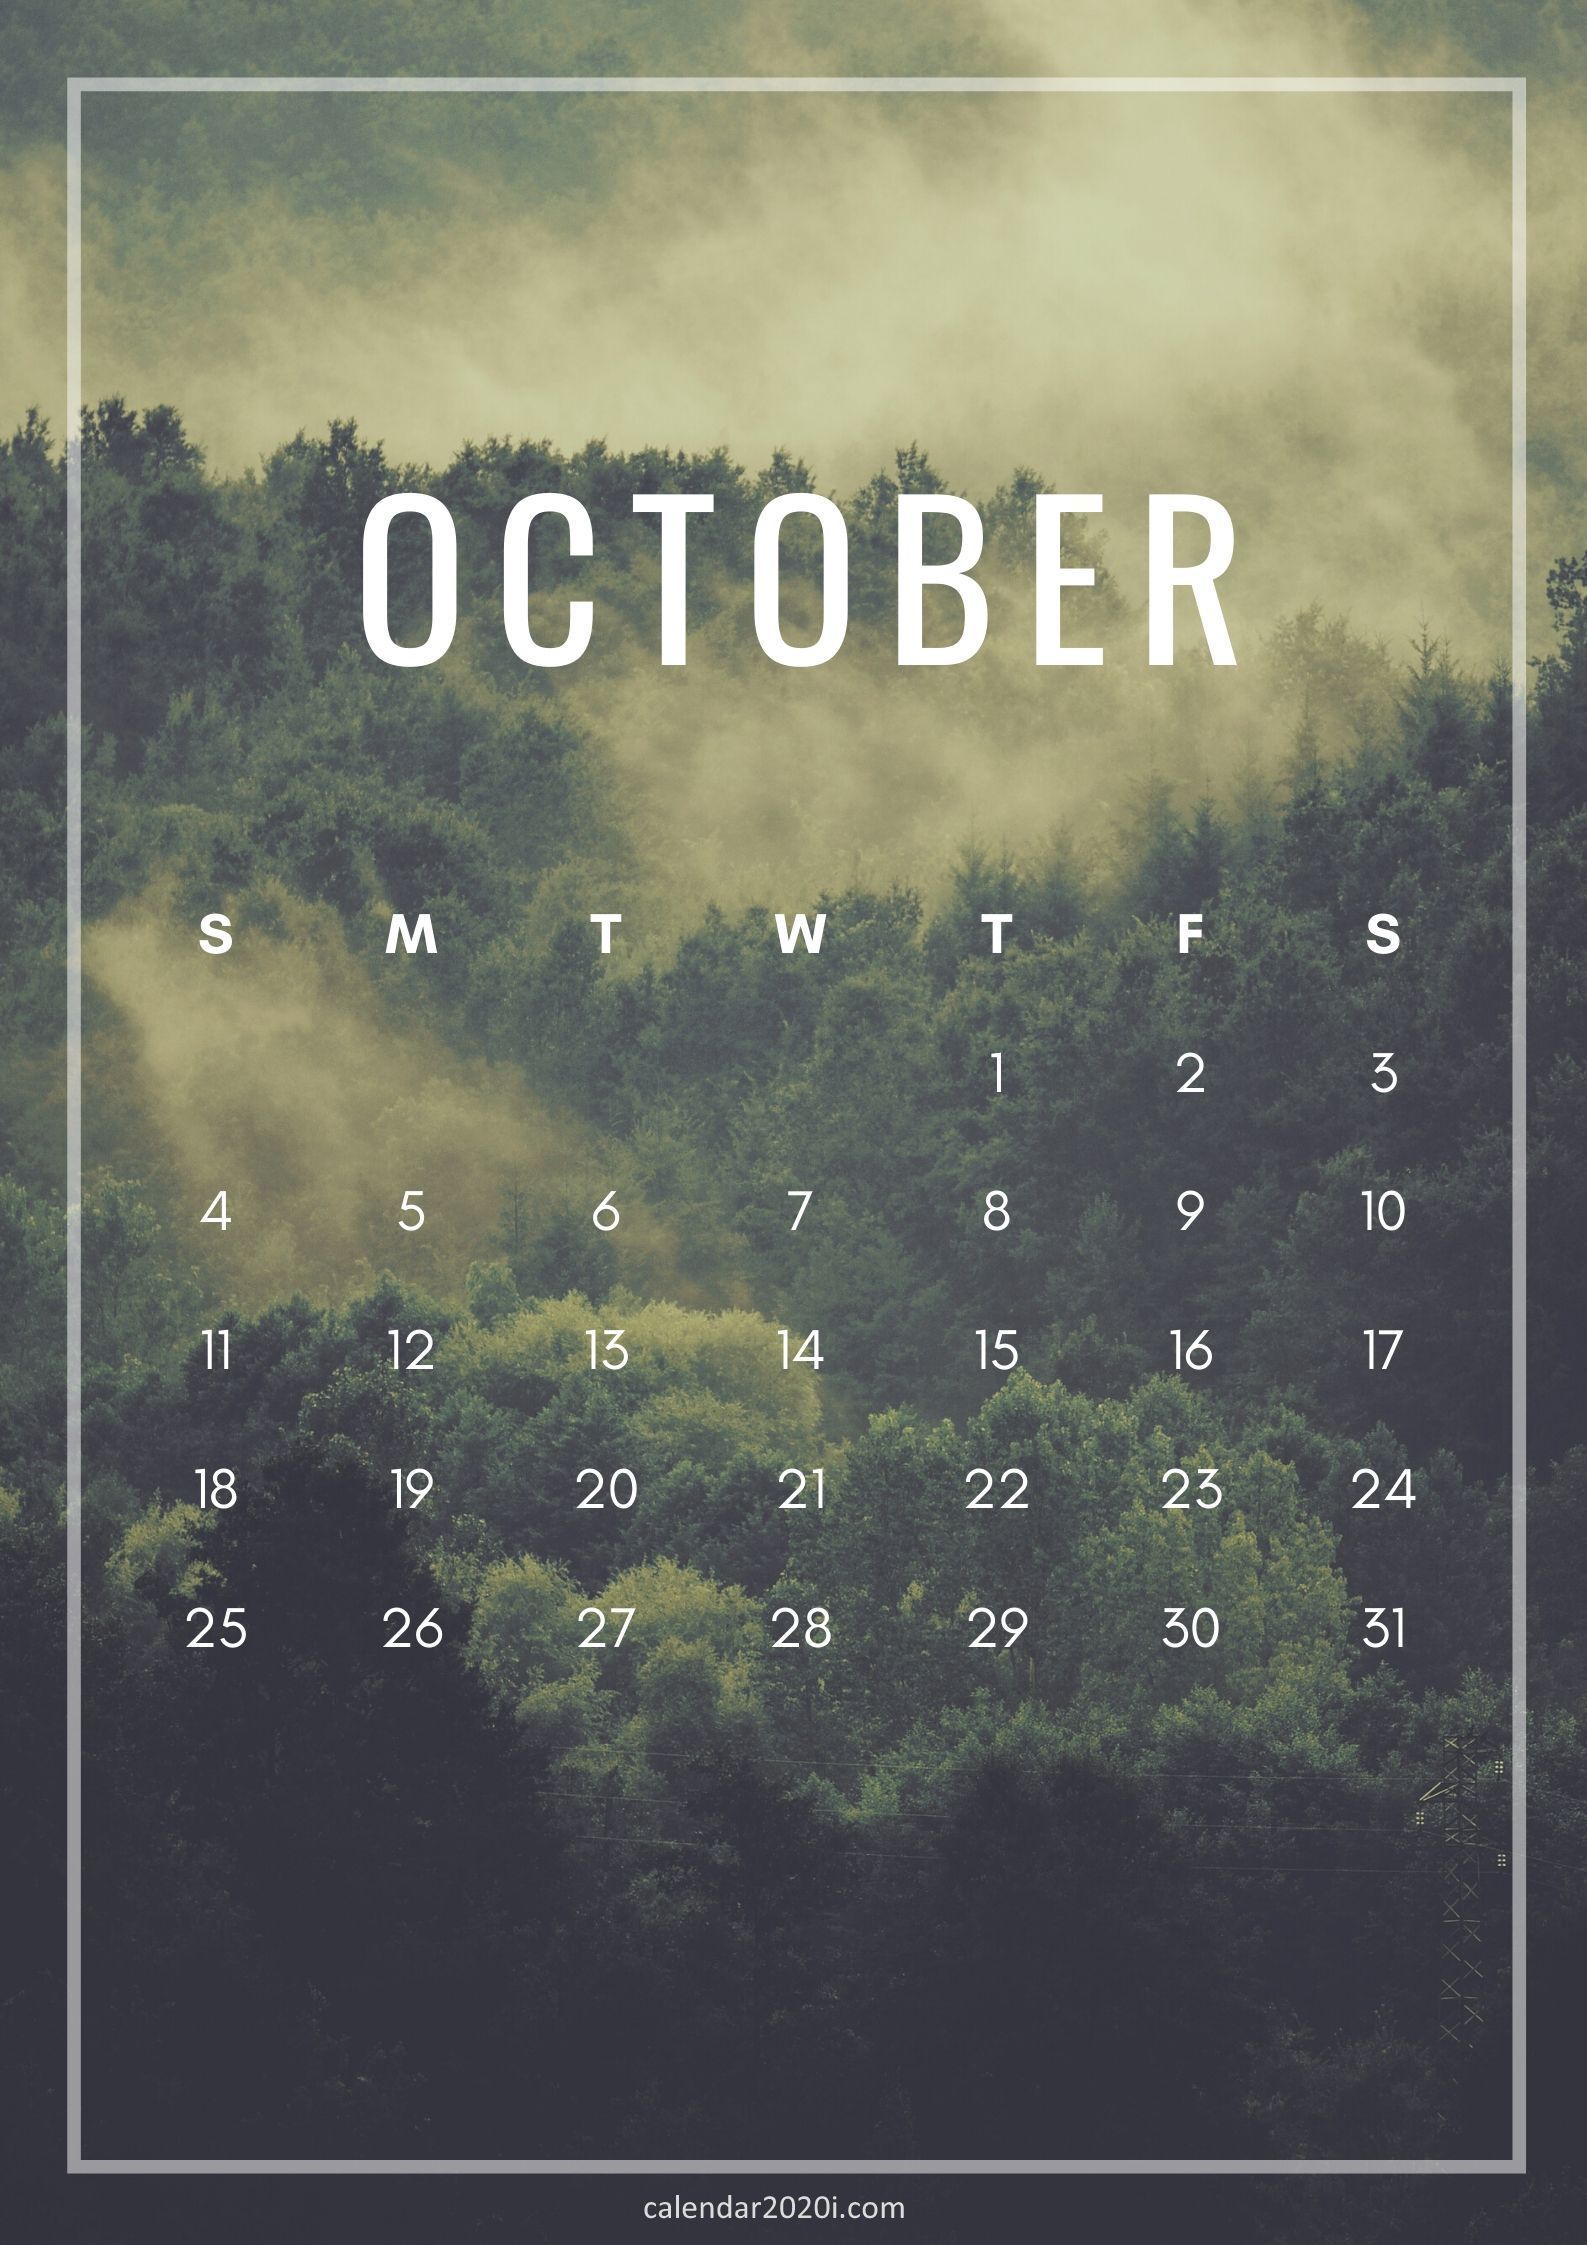 iPhone October 2020 Nature calendar wallpapers in high definition